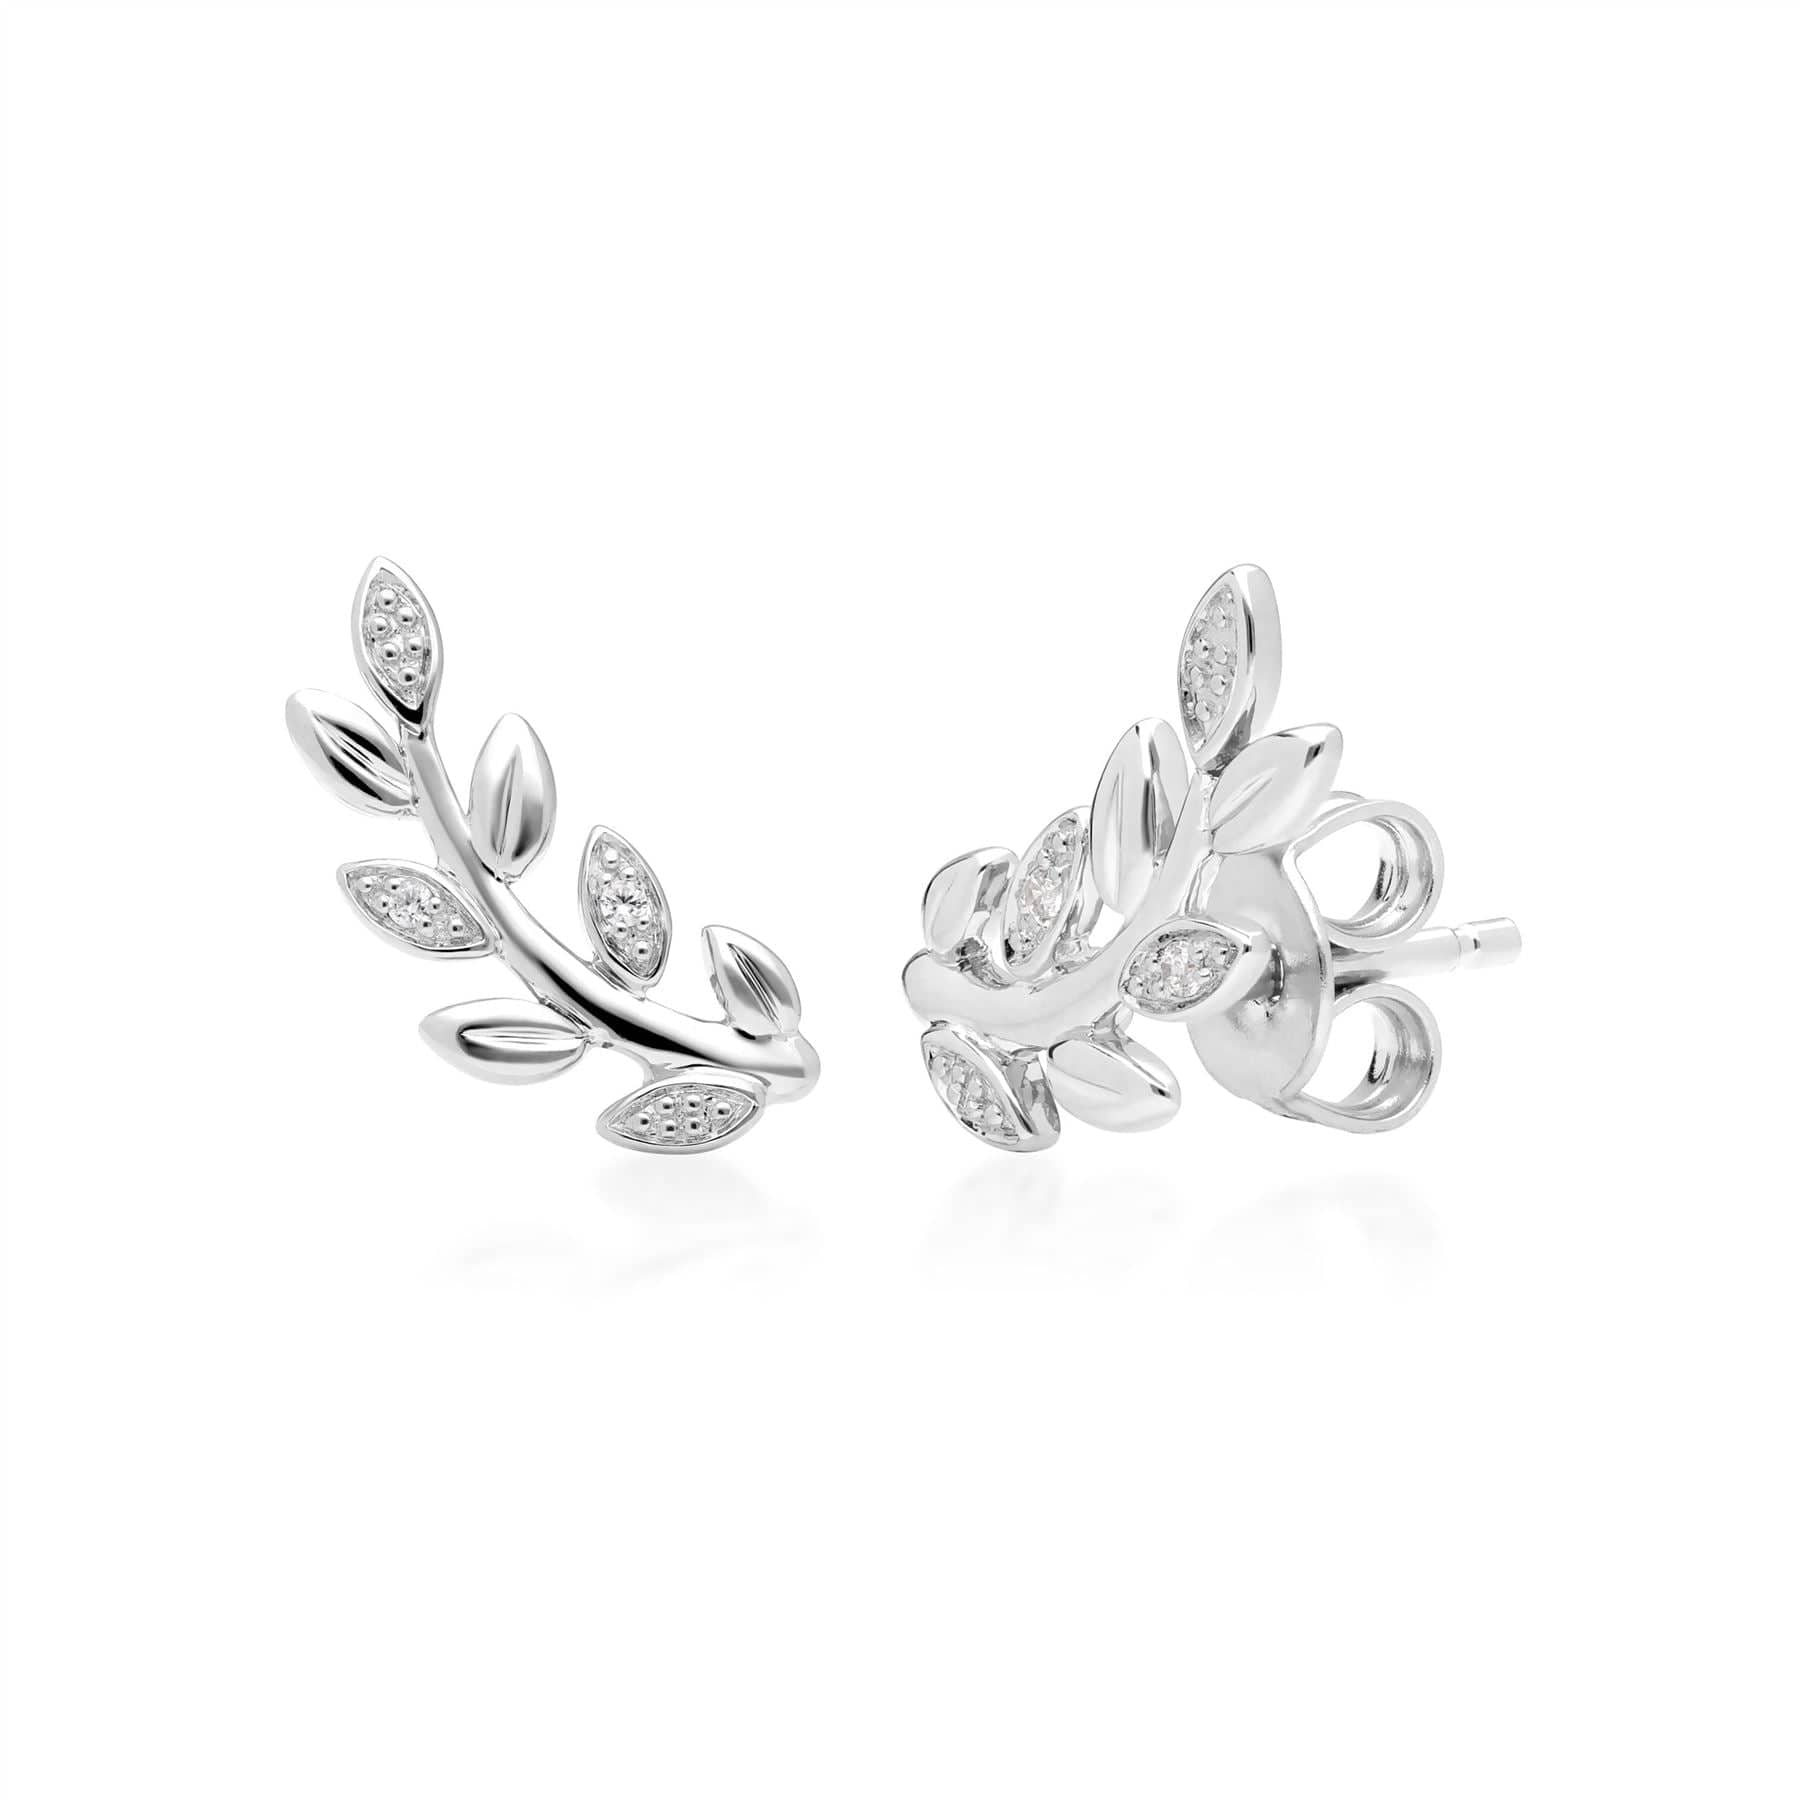 162E0273019 O Leaf Diamond Pave Stud Earrings in 9ct White Gold 1